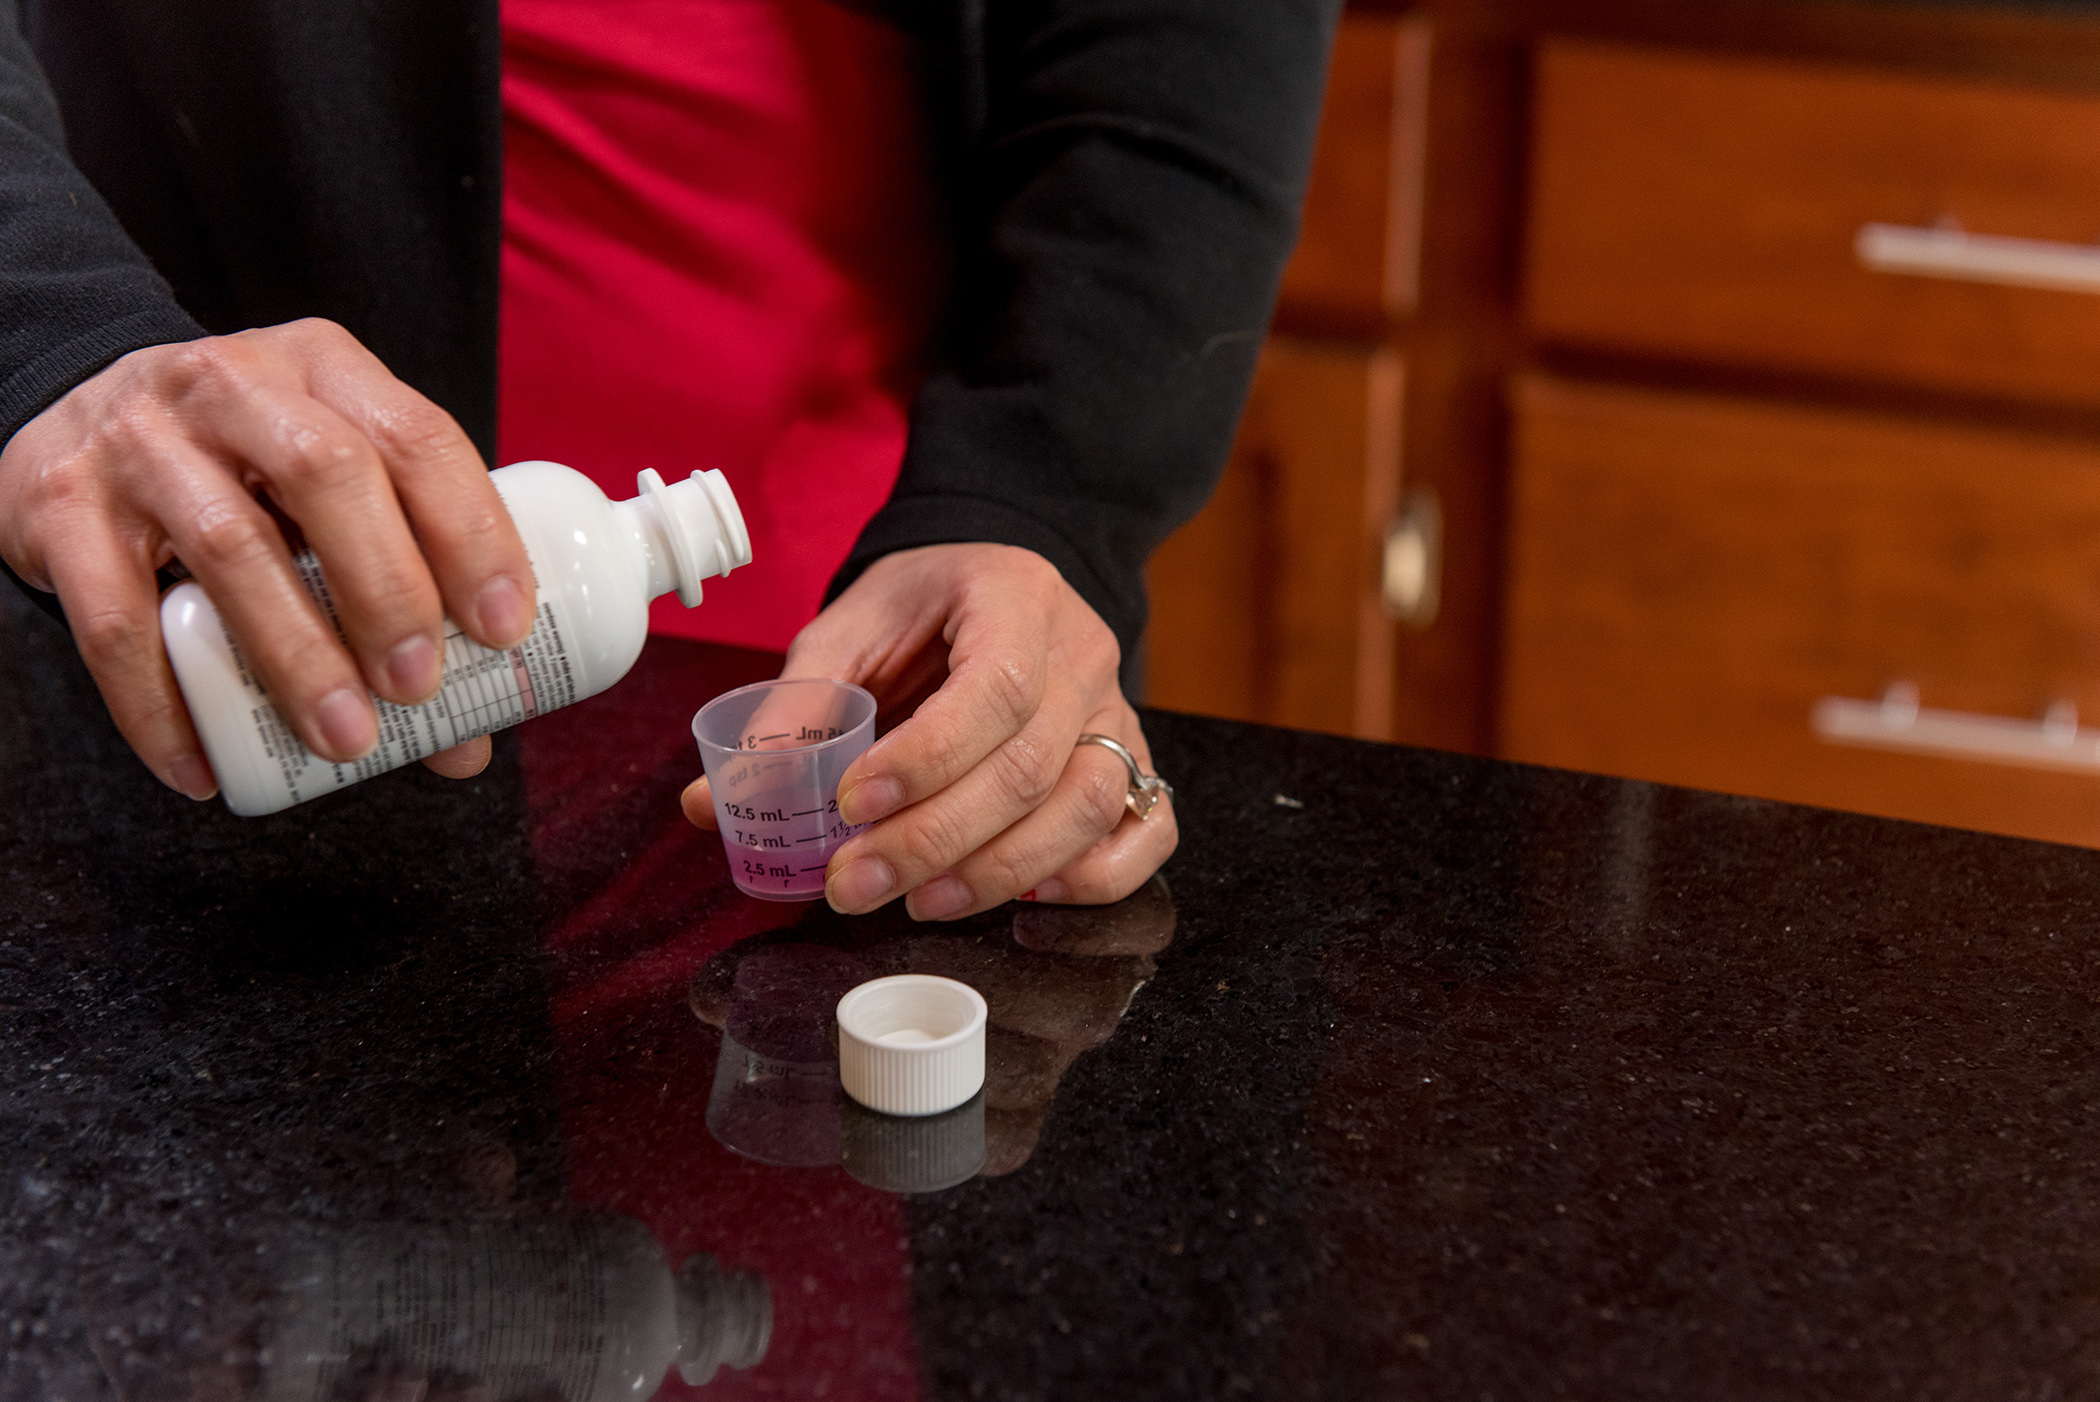 A person pours pink liquid medicine from a white bottle into a dosing cup over a black kitchen counter